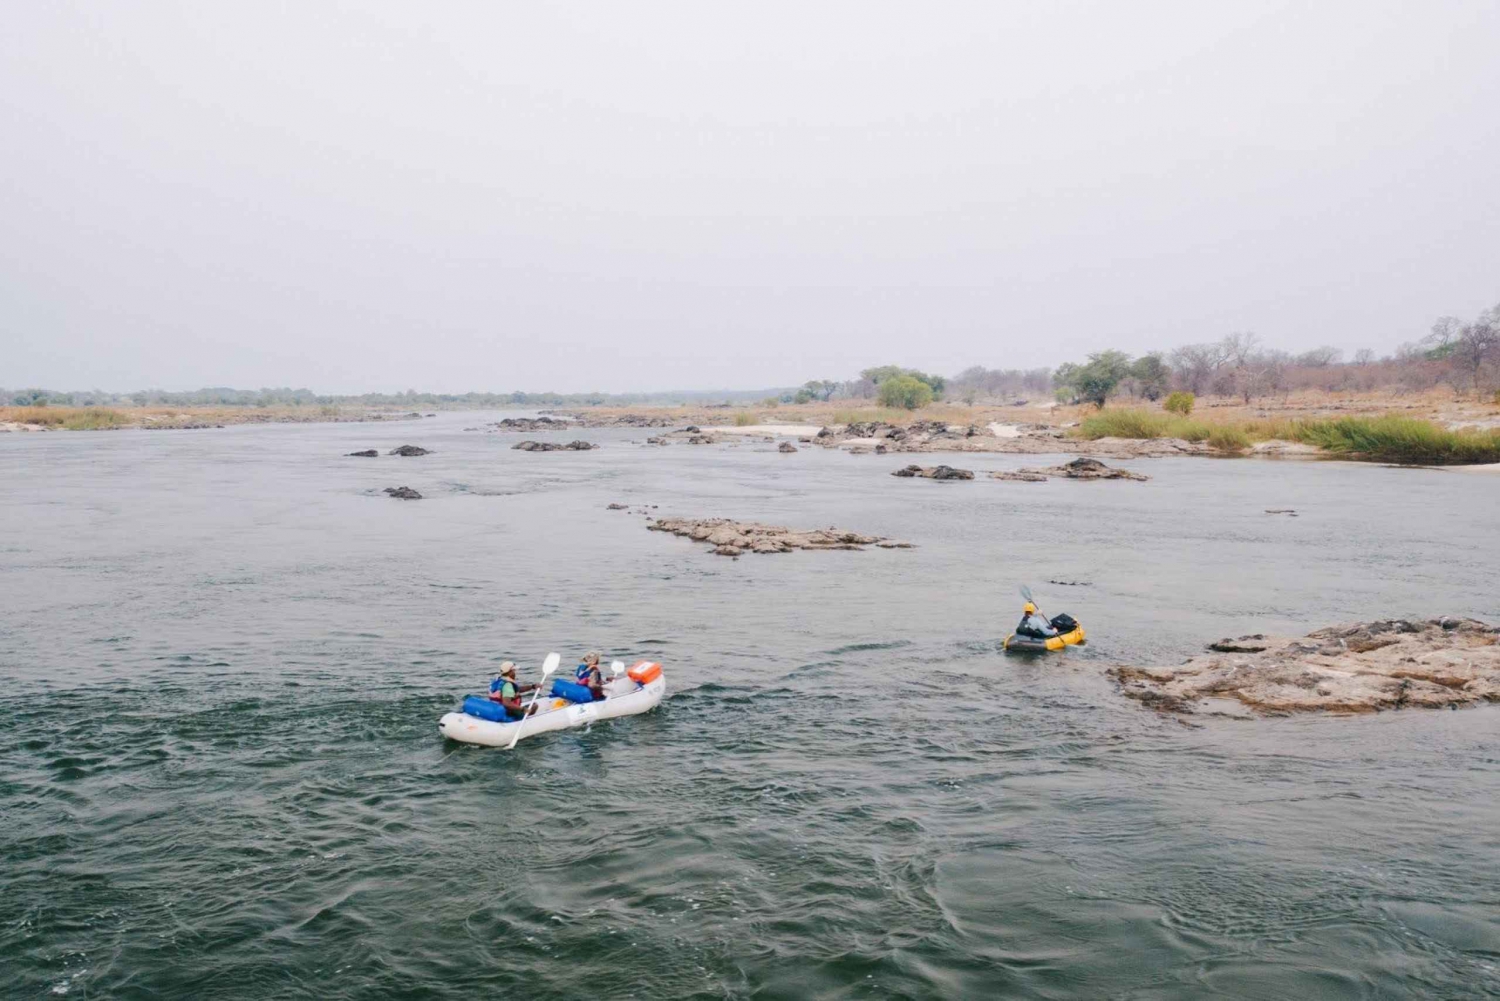 Victoria Falls canoeing company operates and runs canoeing t